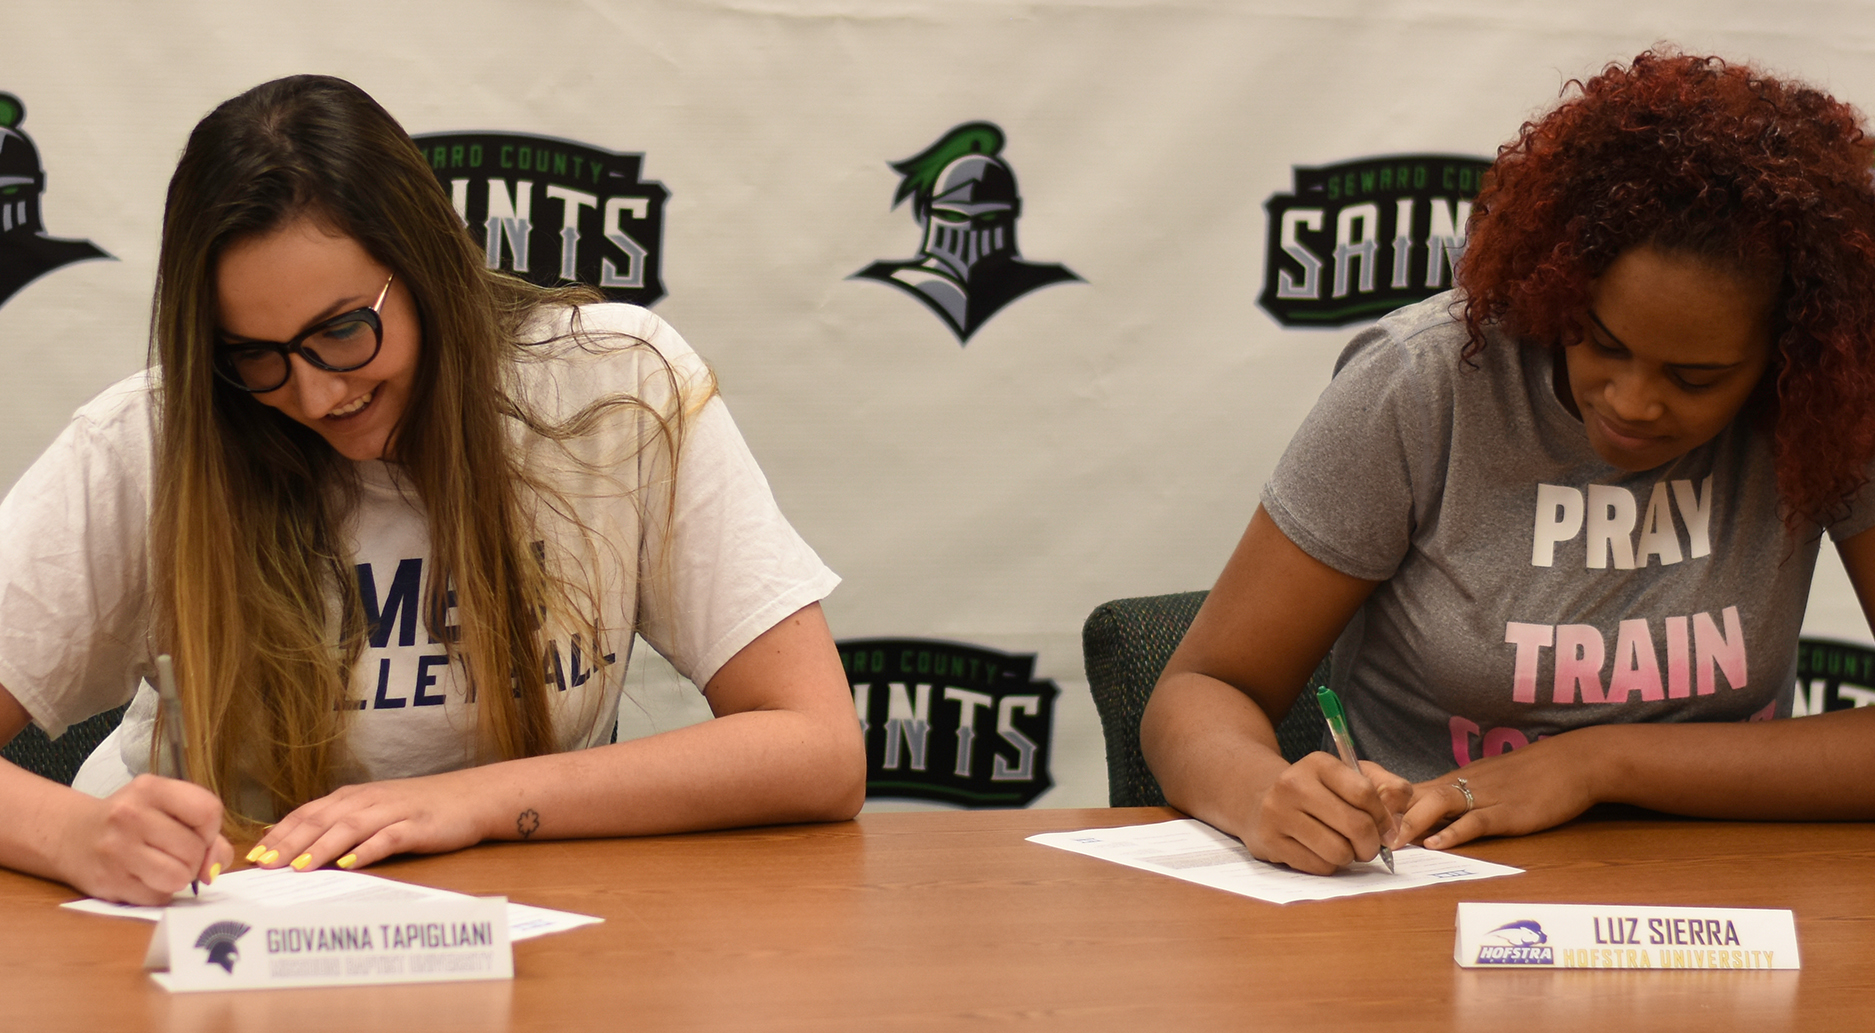 Sierra and Tapigliani Sign to Four Year Schools